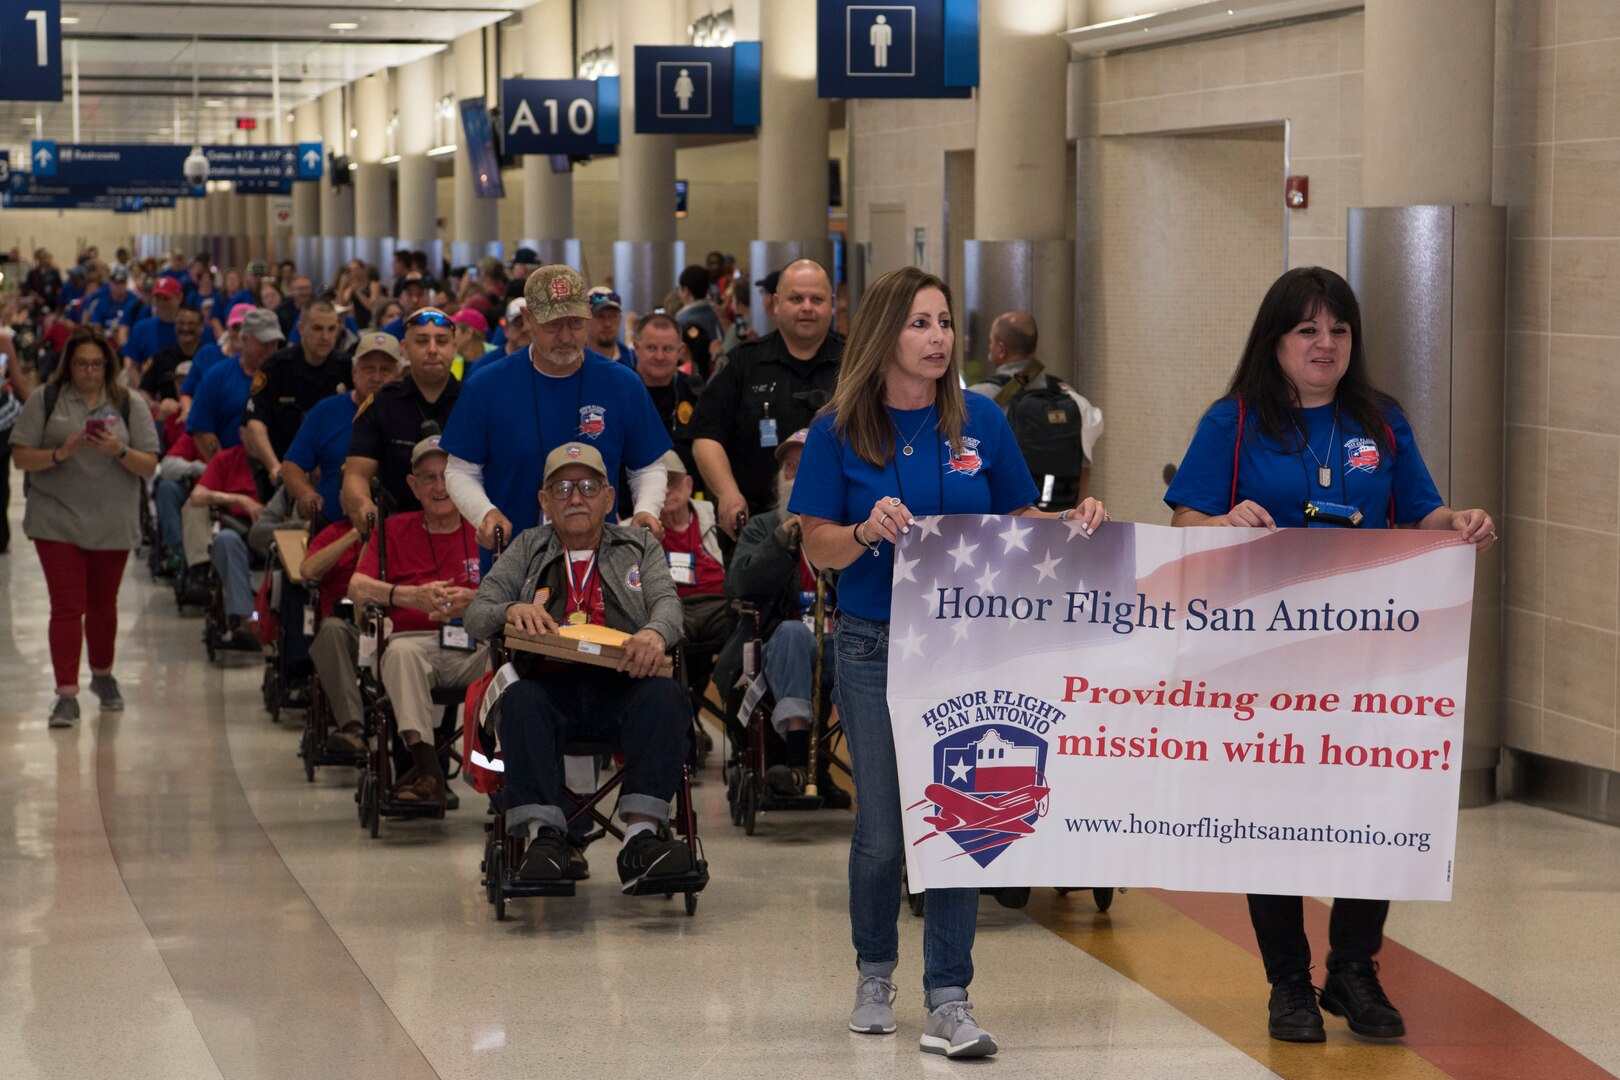 Volunteer "Guardians" for Honor Flight San Antonio parade around 40 veterans of the World War II, Vietnam War and Korean War at their welcome home celebration and ceremony May 5, 2018 at the San Antonio International Airport. Guardians for Honor Flight San Antonio make a $500 donation and are assigned to escort each veteran to ensure they have a "trip of a lifetime".